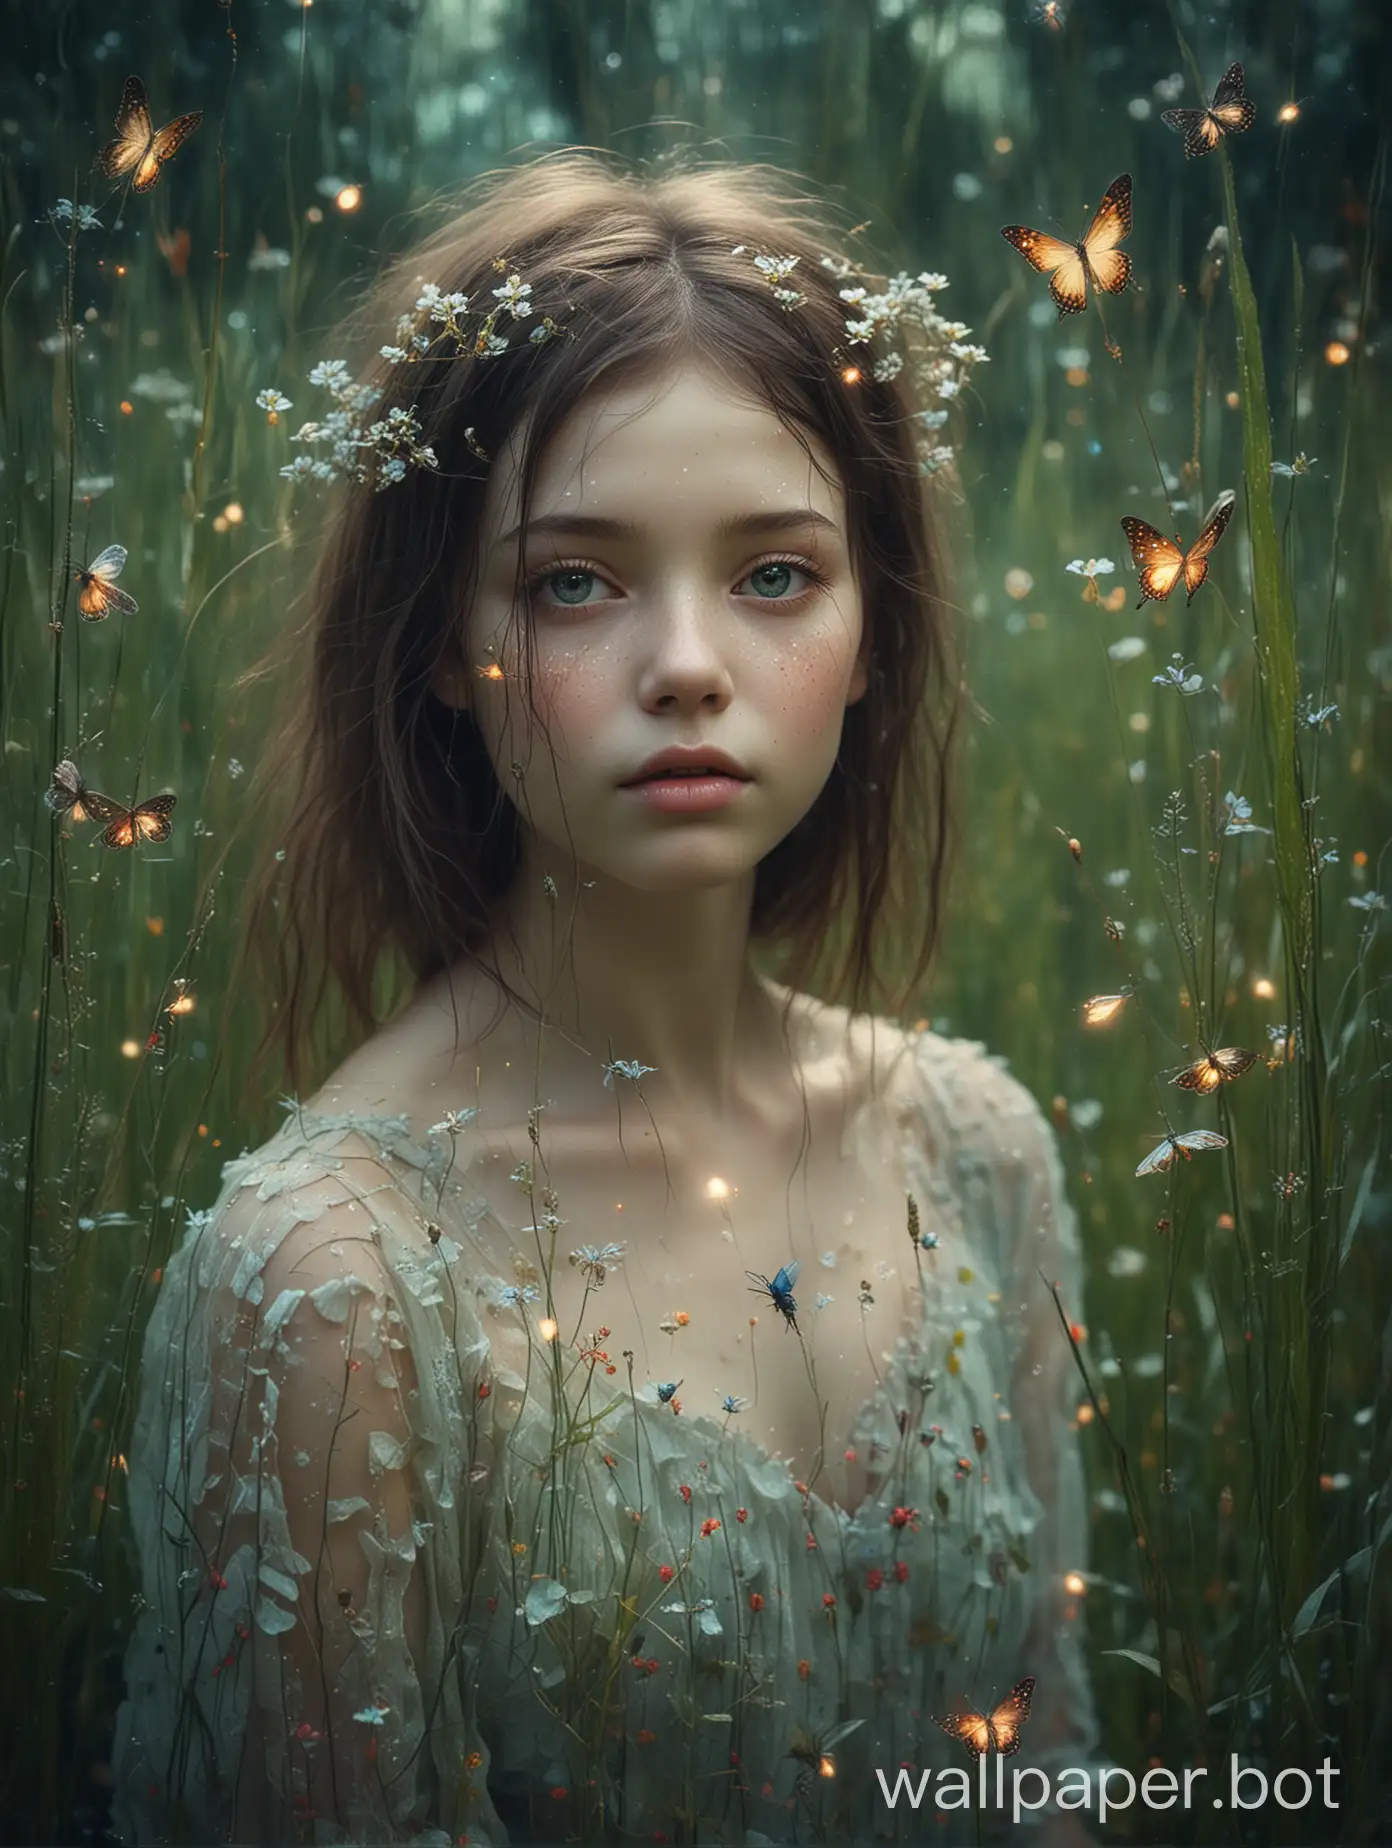 cracked vintage texture, impasto layer, double exposure, botanical background, meadow grasses and flowers, glowing mini fireflies, butterflies, shimmering soft neon tones, girl, tenderness and softness, natural makeup, style combination Nicoletta Ceccoli Tim Burton Jasmine Beckett-Griffith.